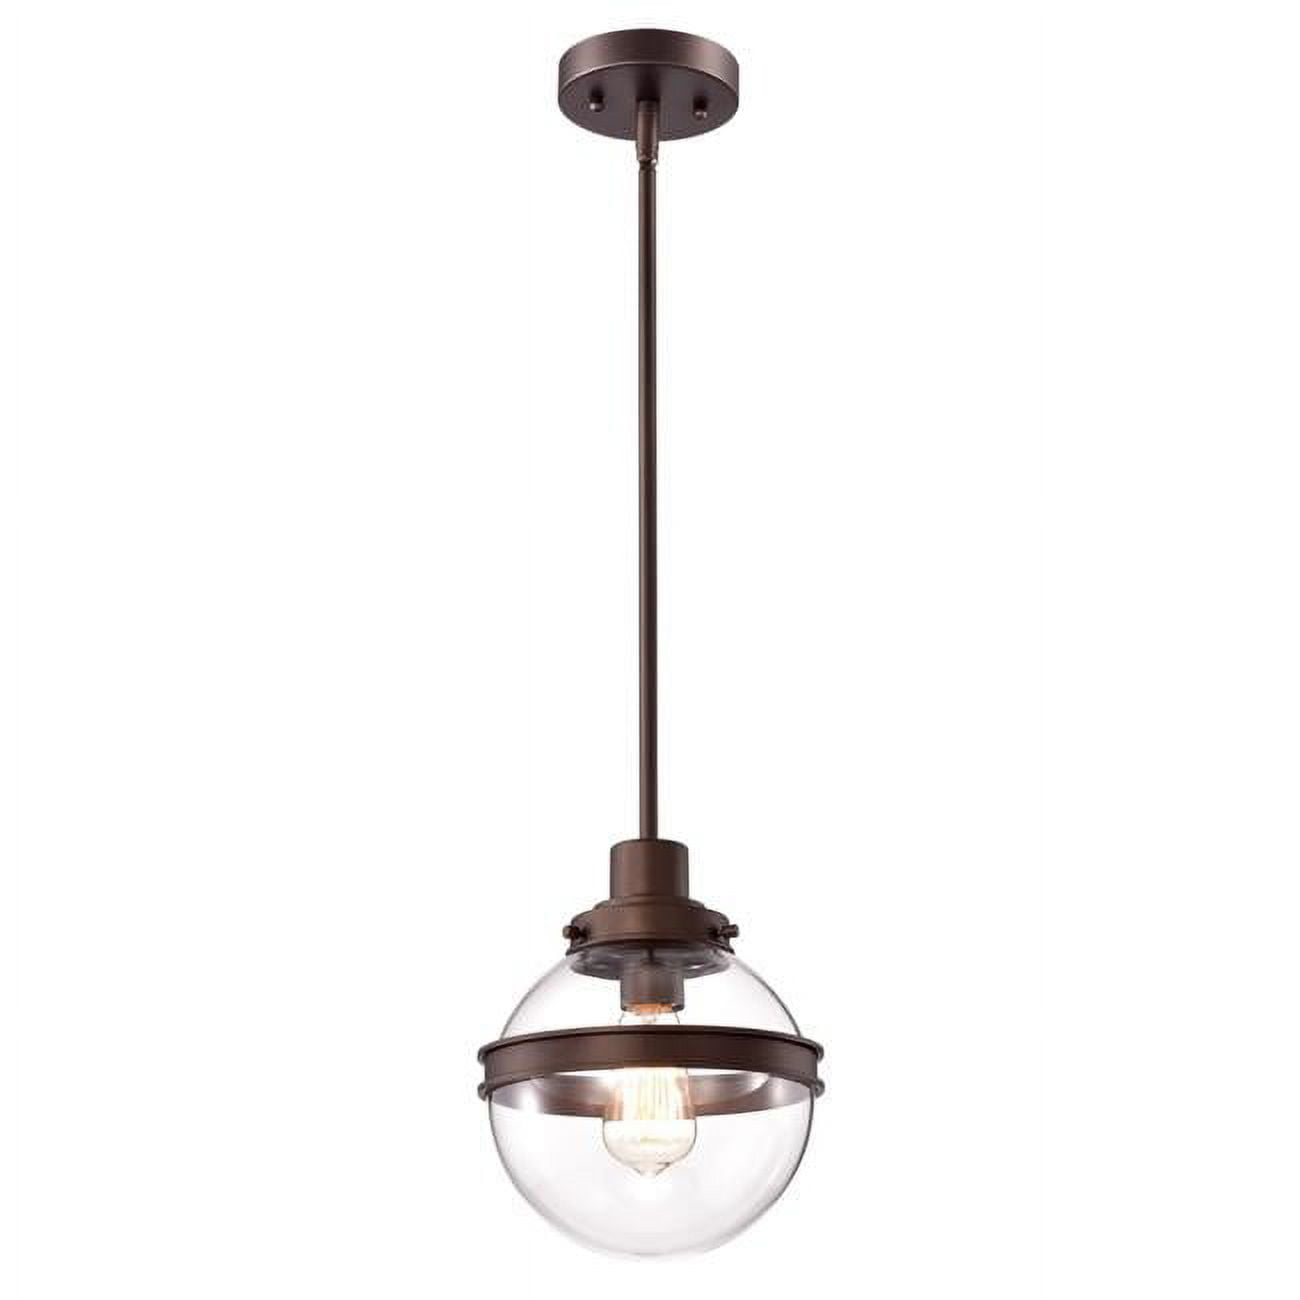 9 in. Wide Roan Transitional 1 Light Mini Pendant Ceiling Fixture, Oil Rubbed Bronze -  FeeltheGlow, FE2828155